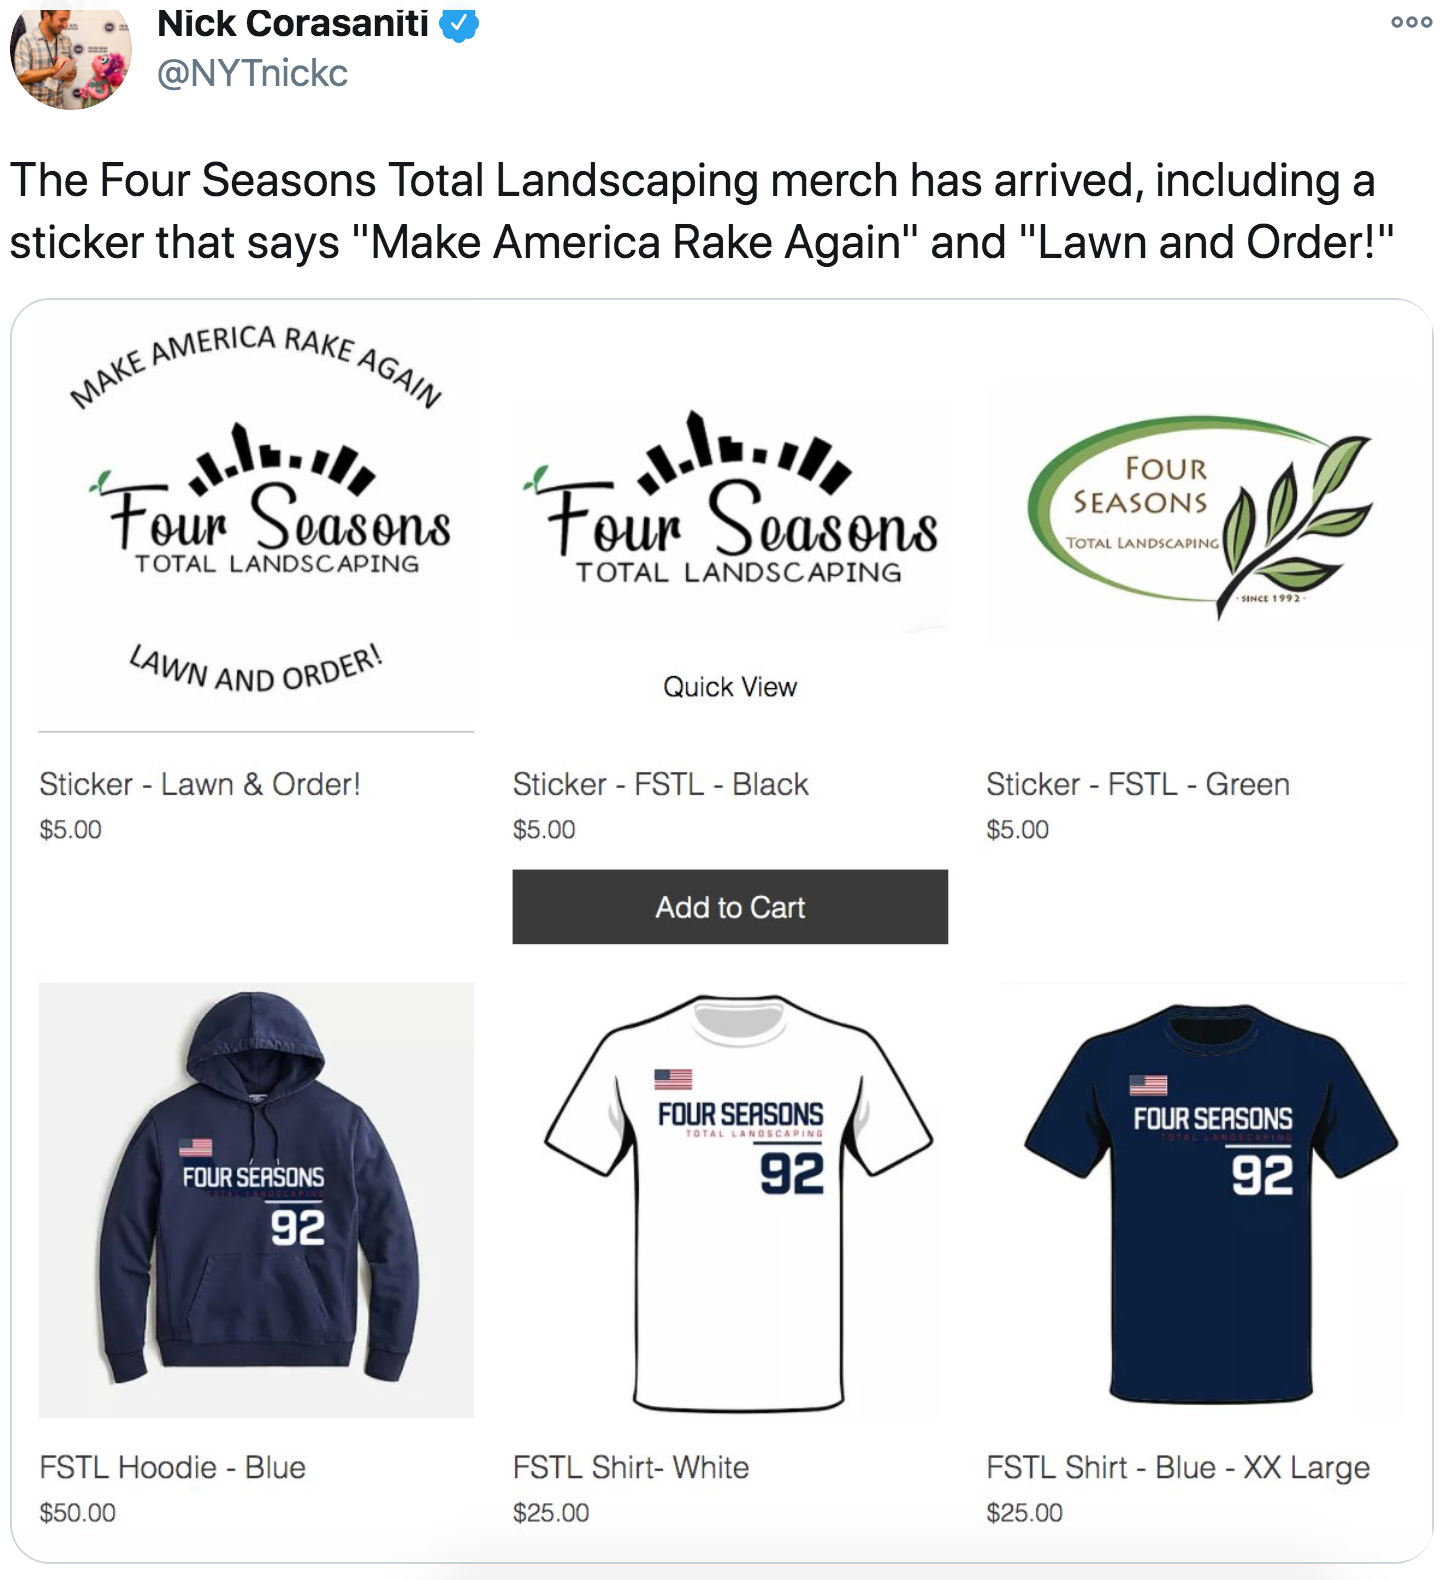 t shirt - Gob Nick Corasaniti The Four Seasons Total Landscaping merch has arrived, including a sticker that says "Make America Rake Again" and "Lawn and Order!" Rake E Again Make America ..!! Four Seasons Four Seasons Four Seasons Total Landscaping Total